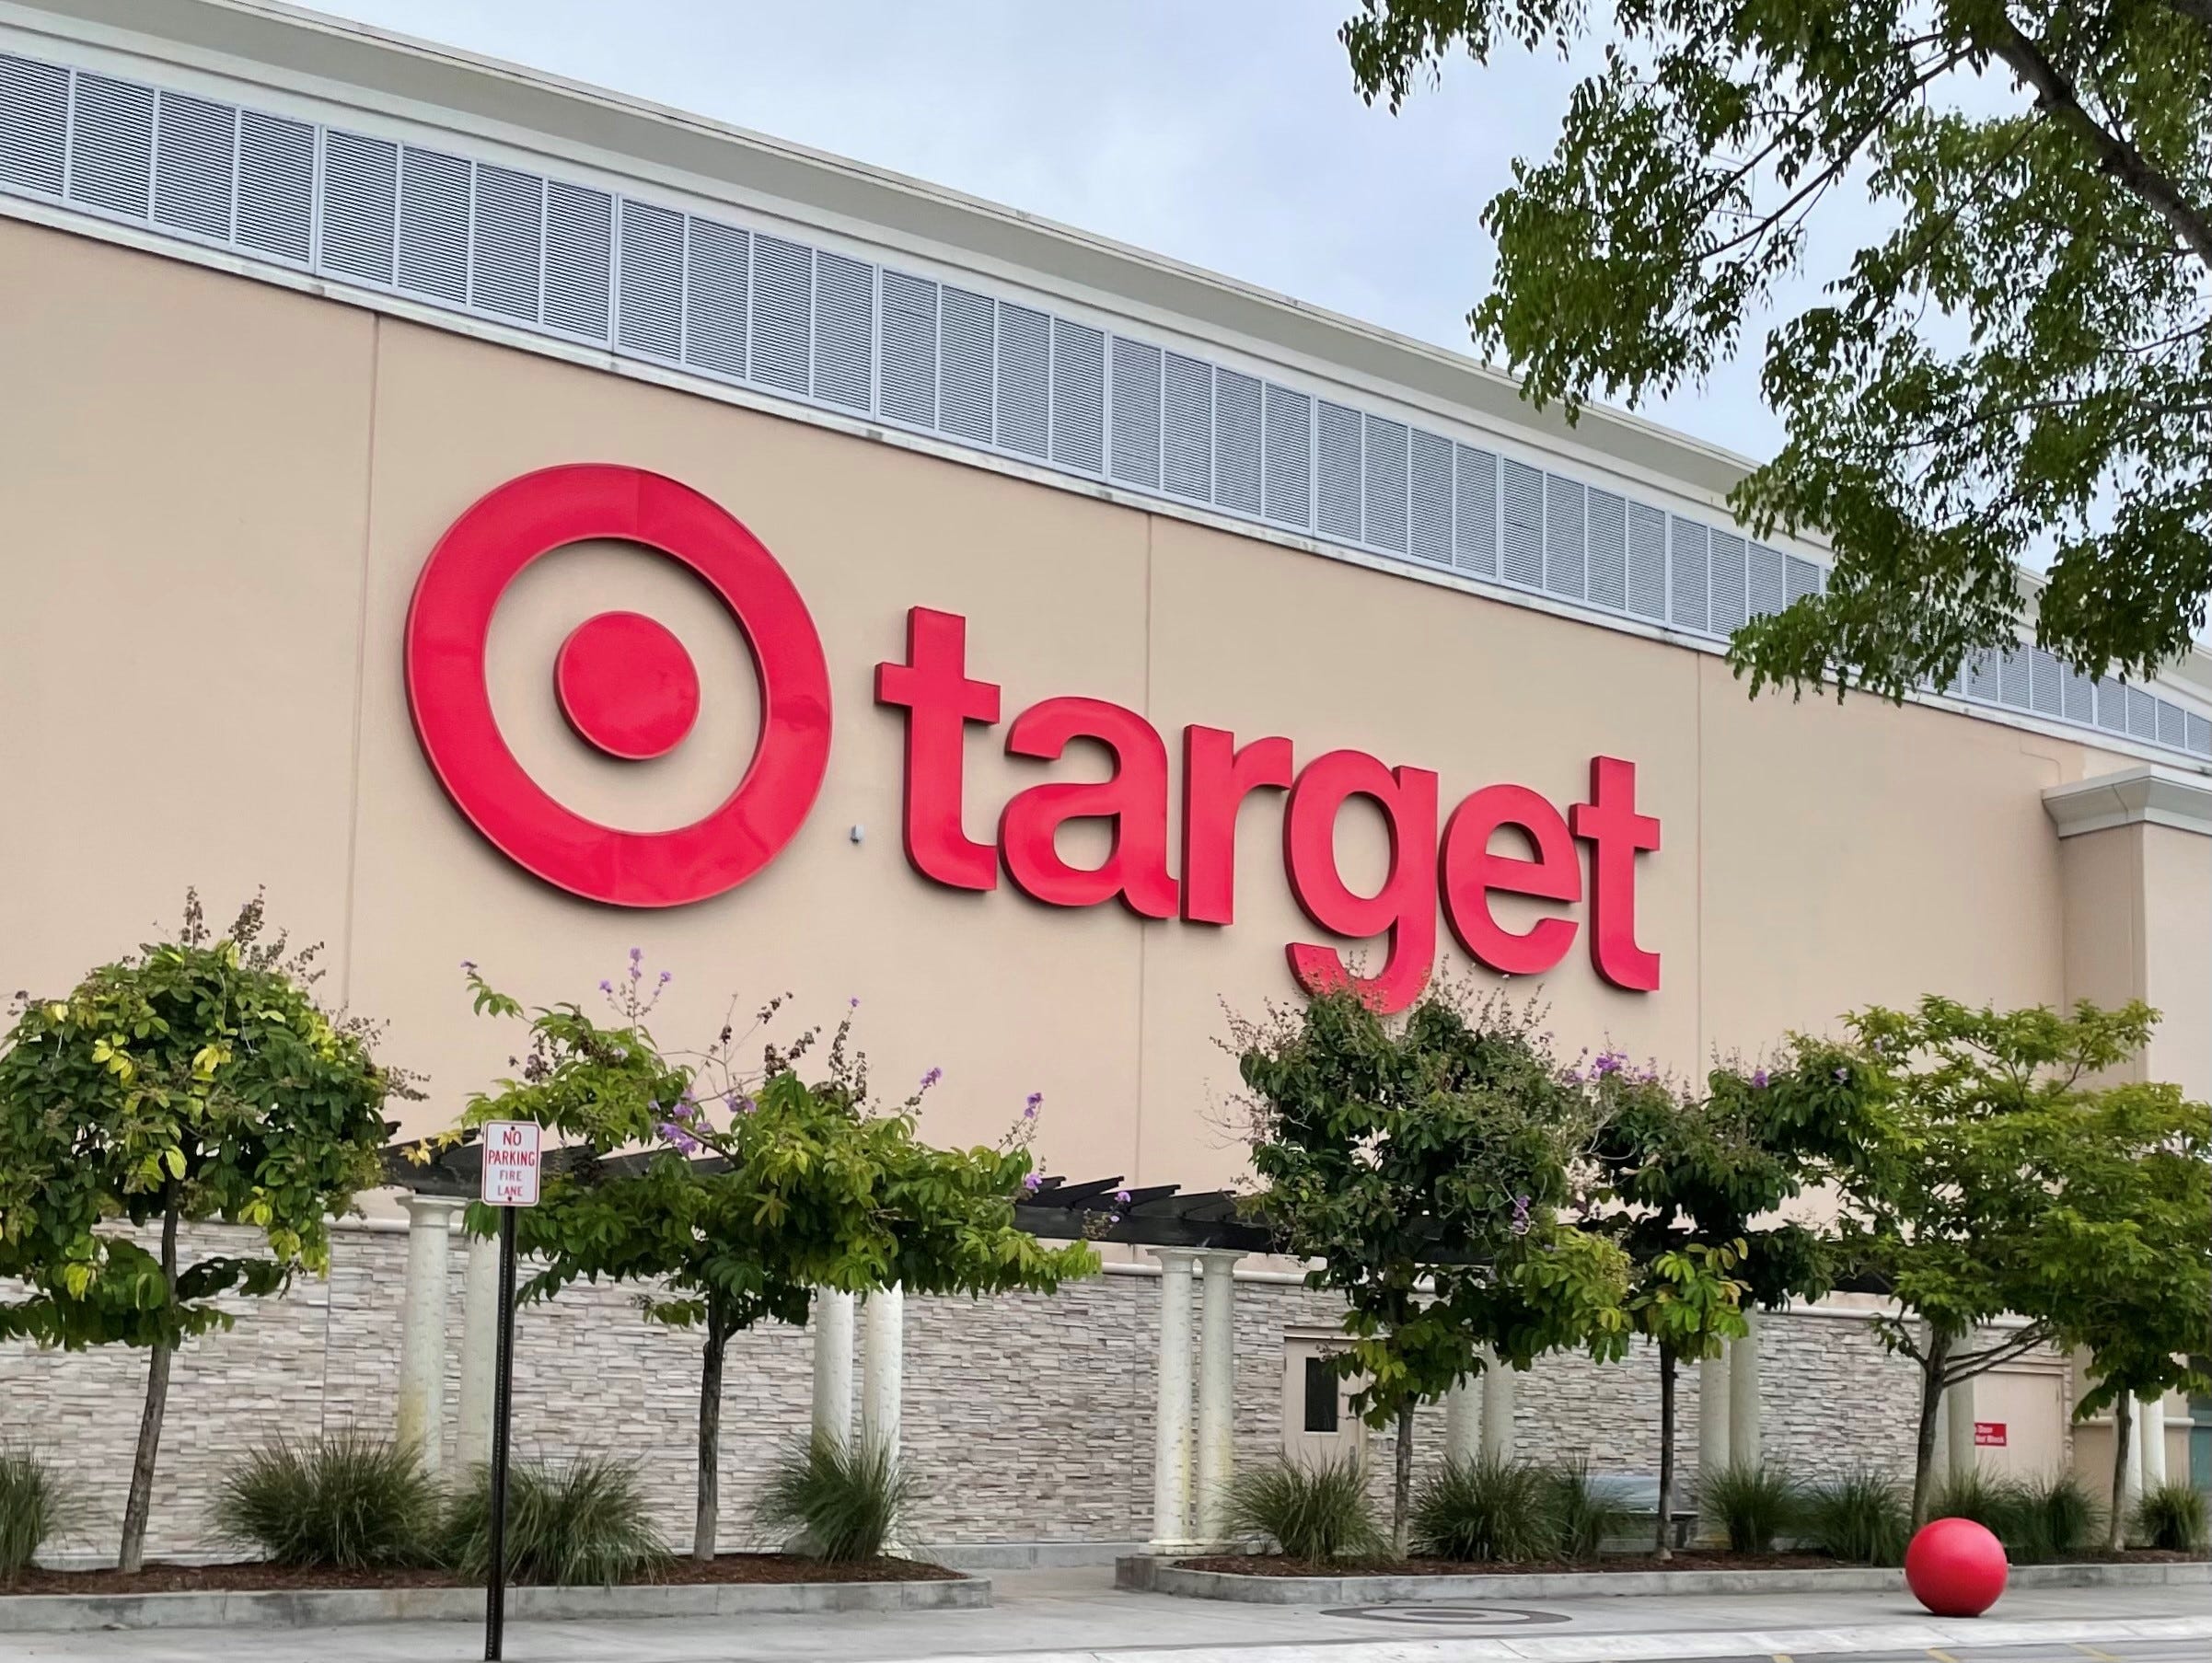 The exterior of a Target store